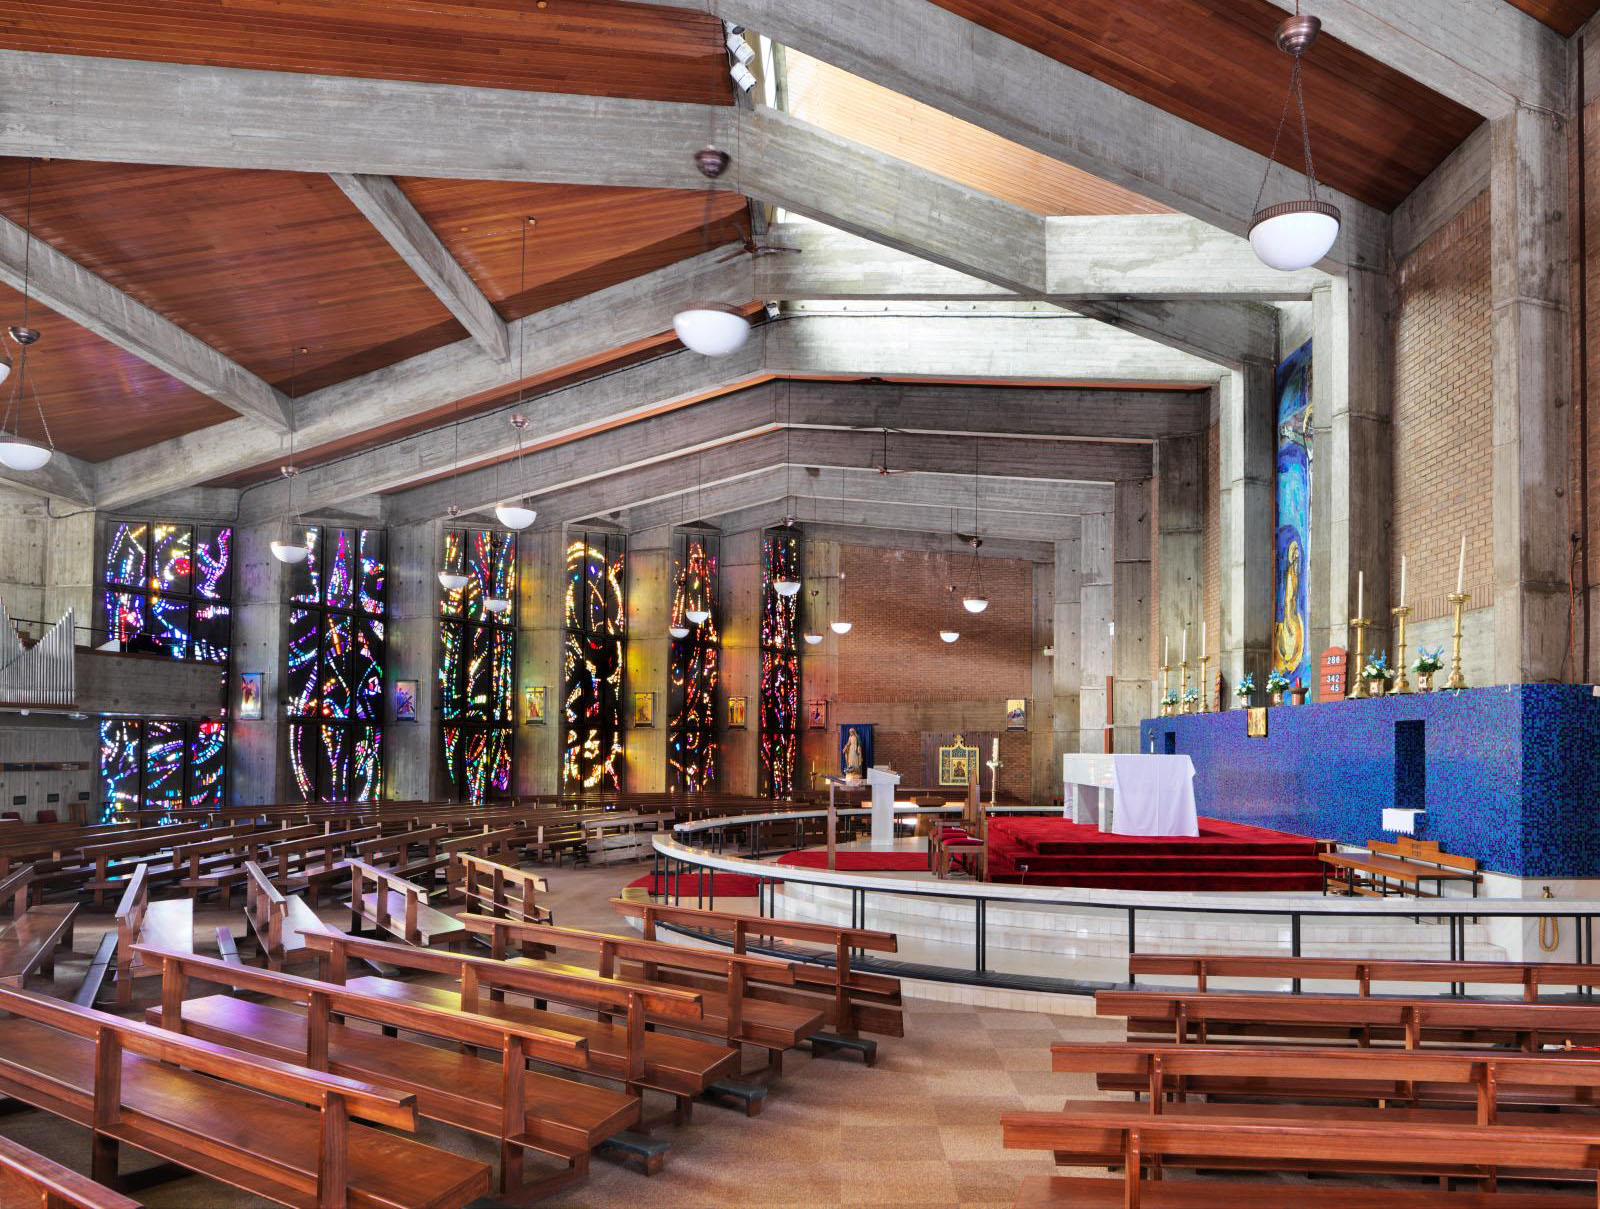 Image of the interior of St Jude's in Wigan showing the modern pews and stained glass windows.